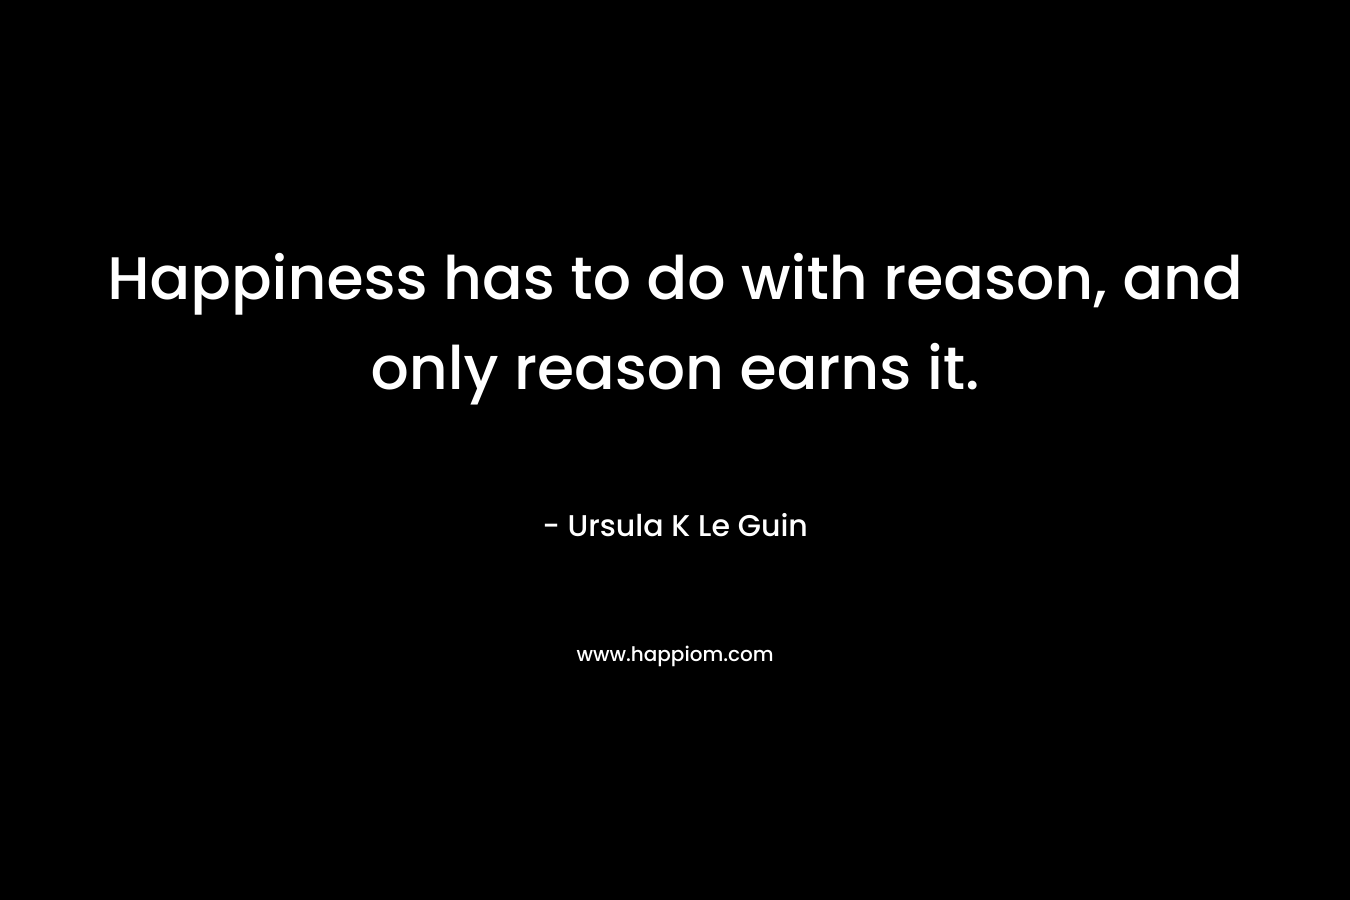 Happiness has to do with reason, and only reason earns it. – Ursula K Le Guin